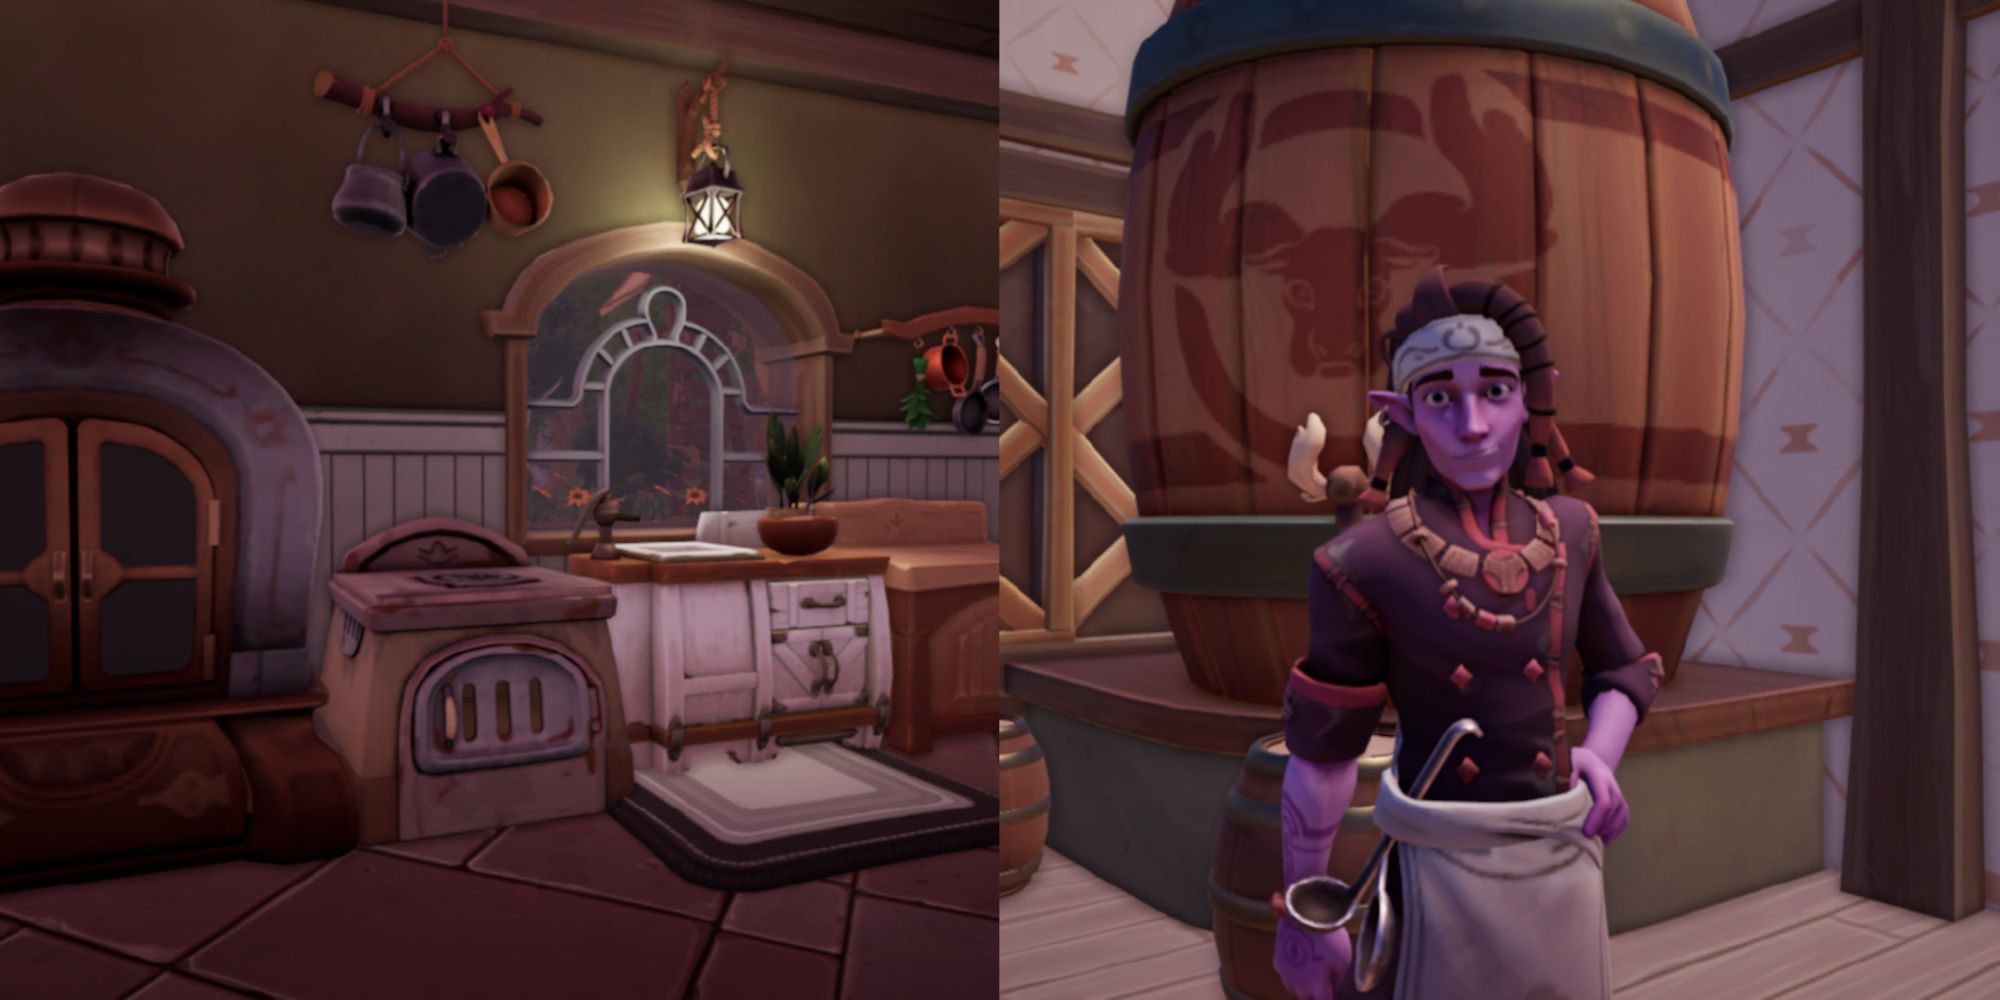 Split image featuring a player kitchen design in their home and Reth at the counter of the inn in Palia.